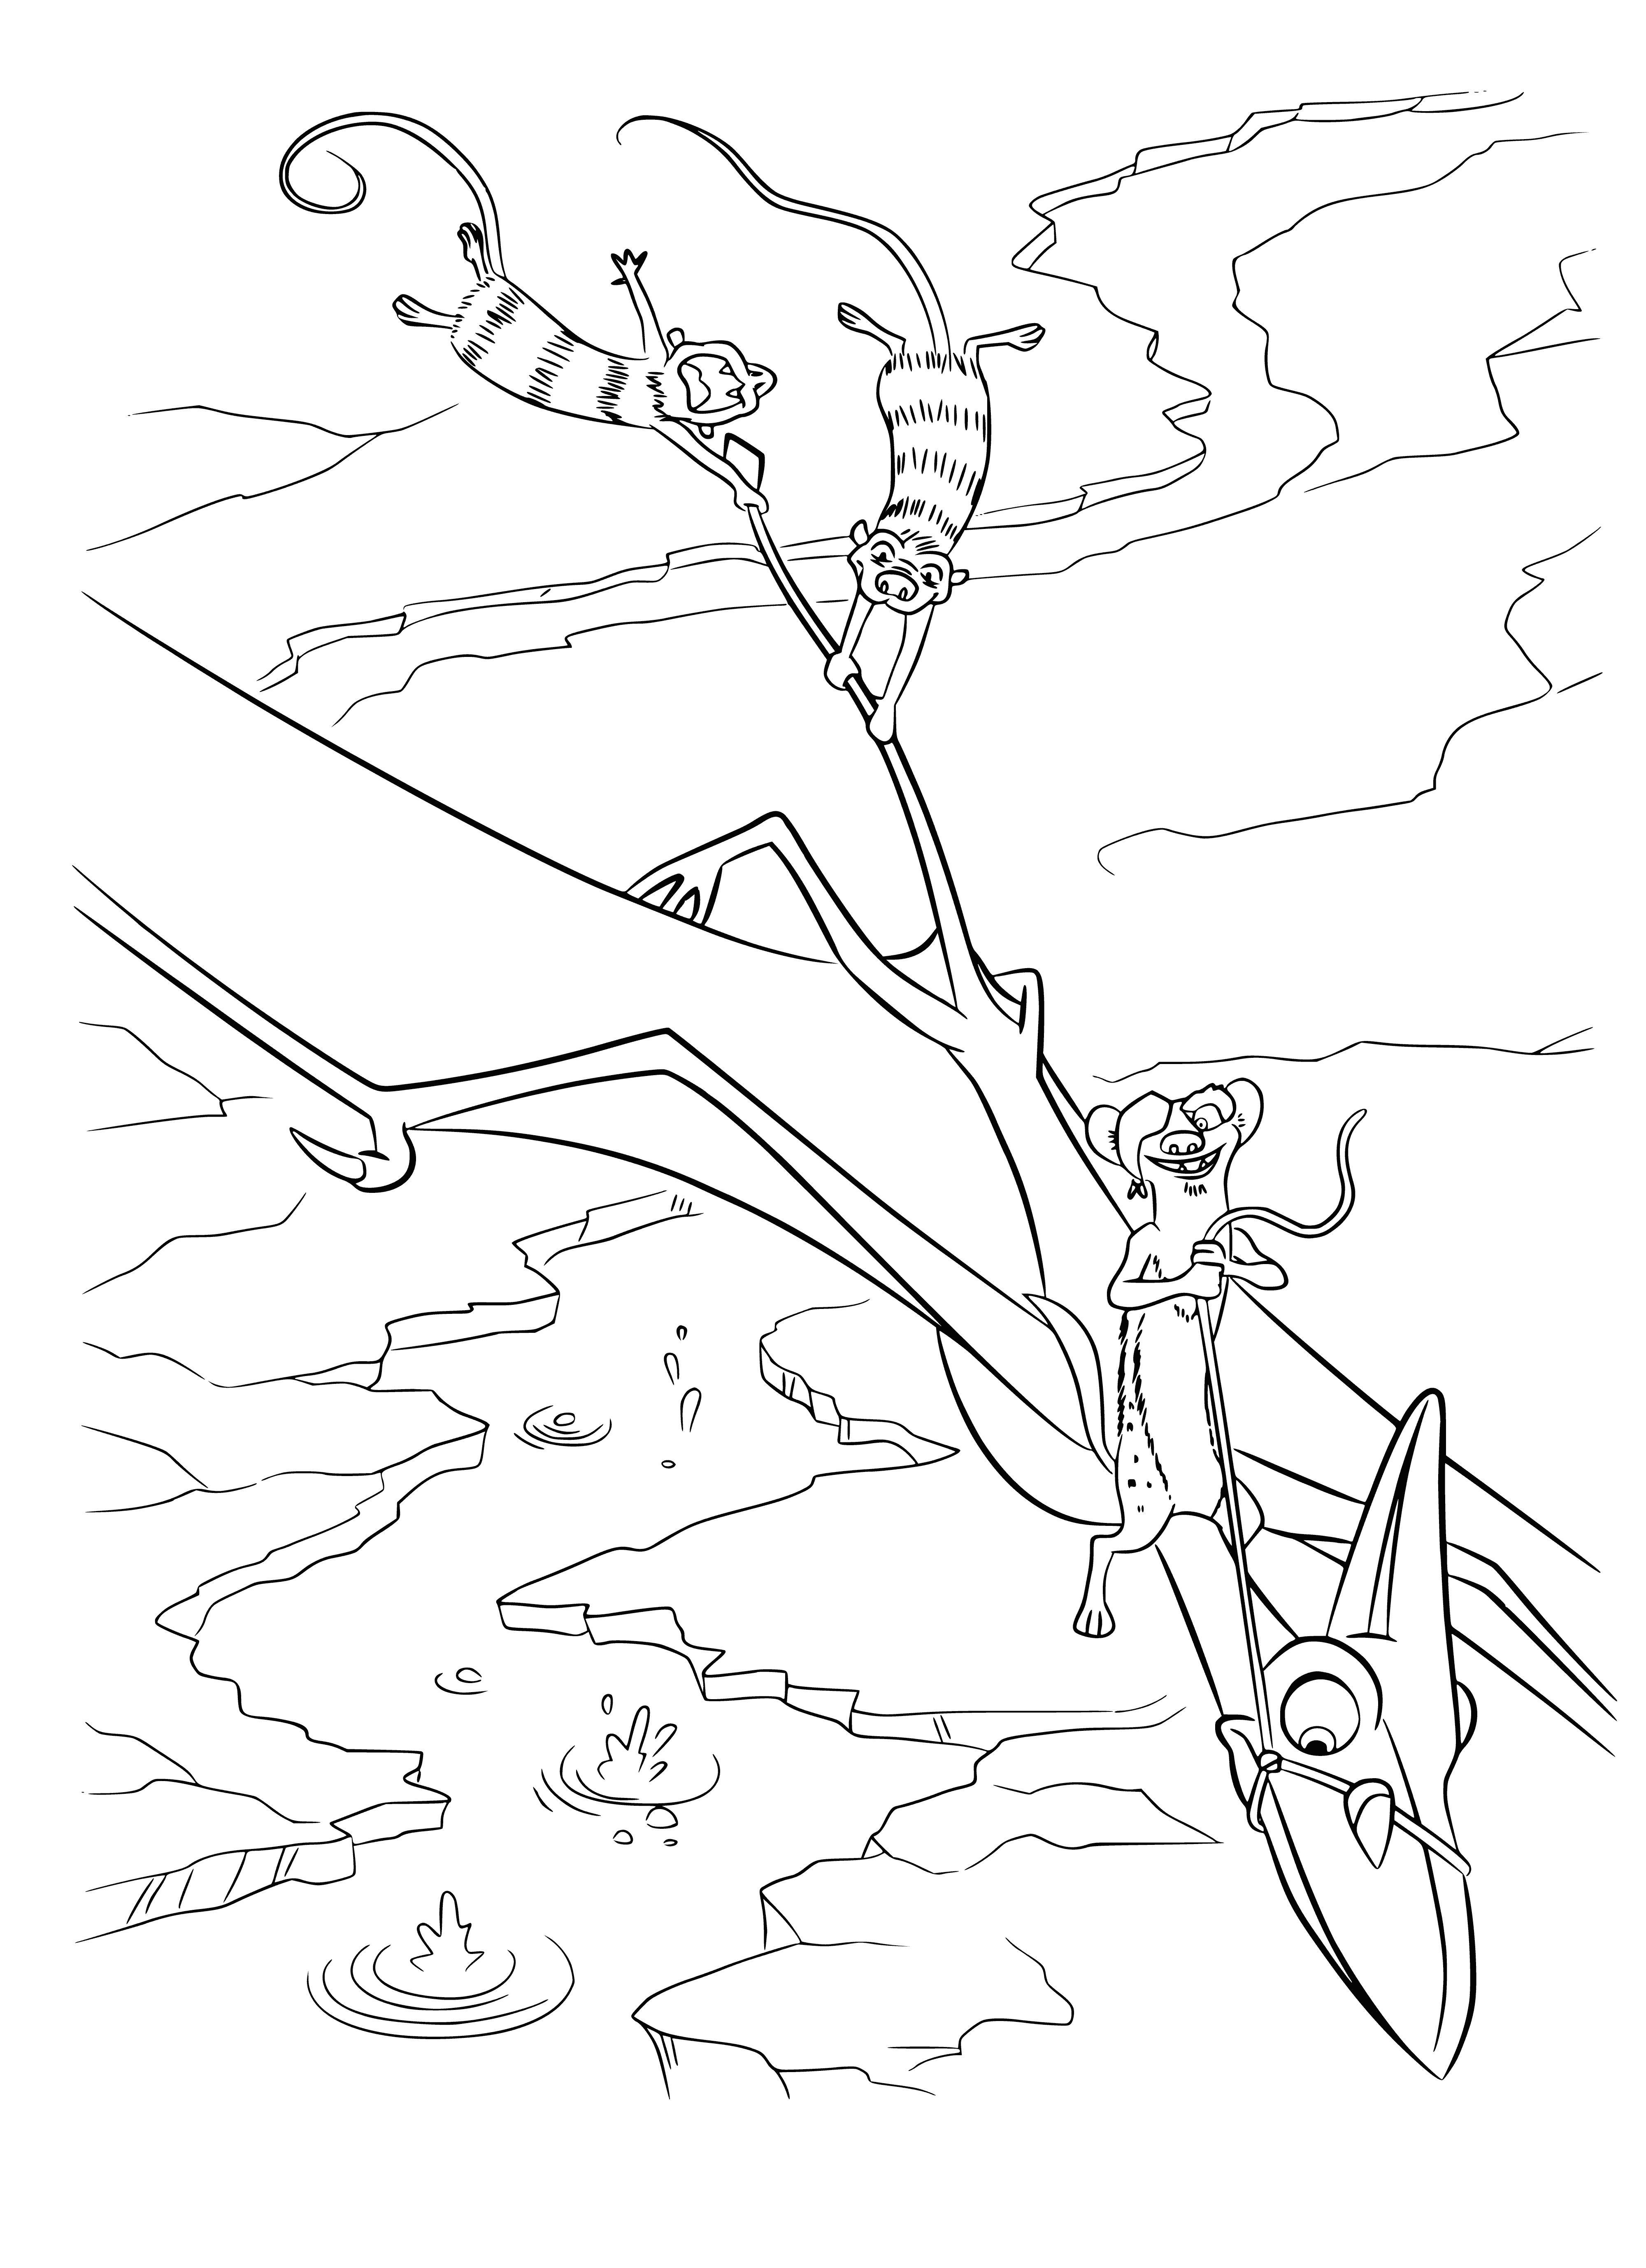 Bug and possums coloring page